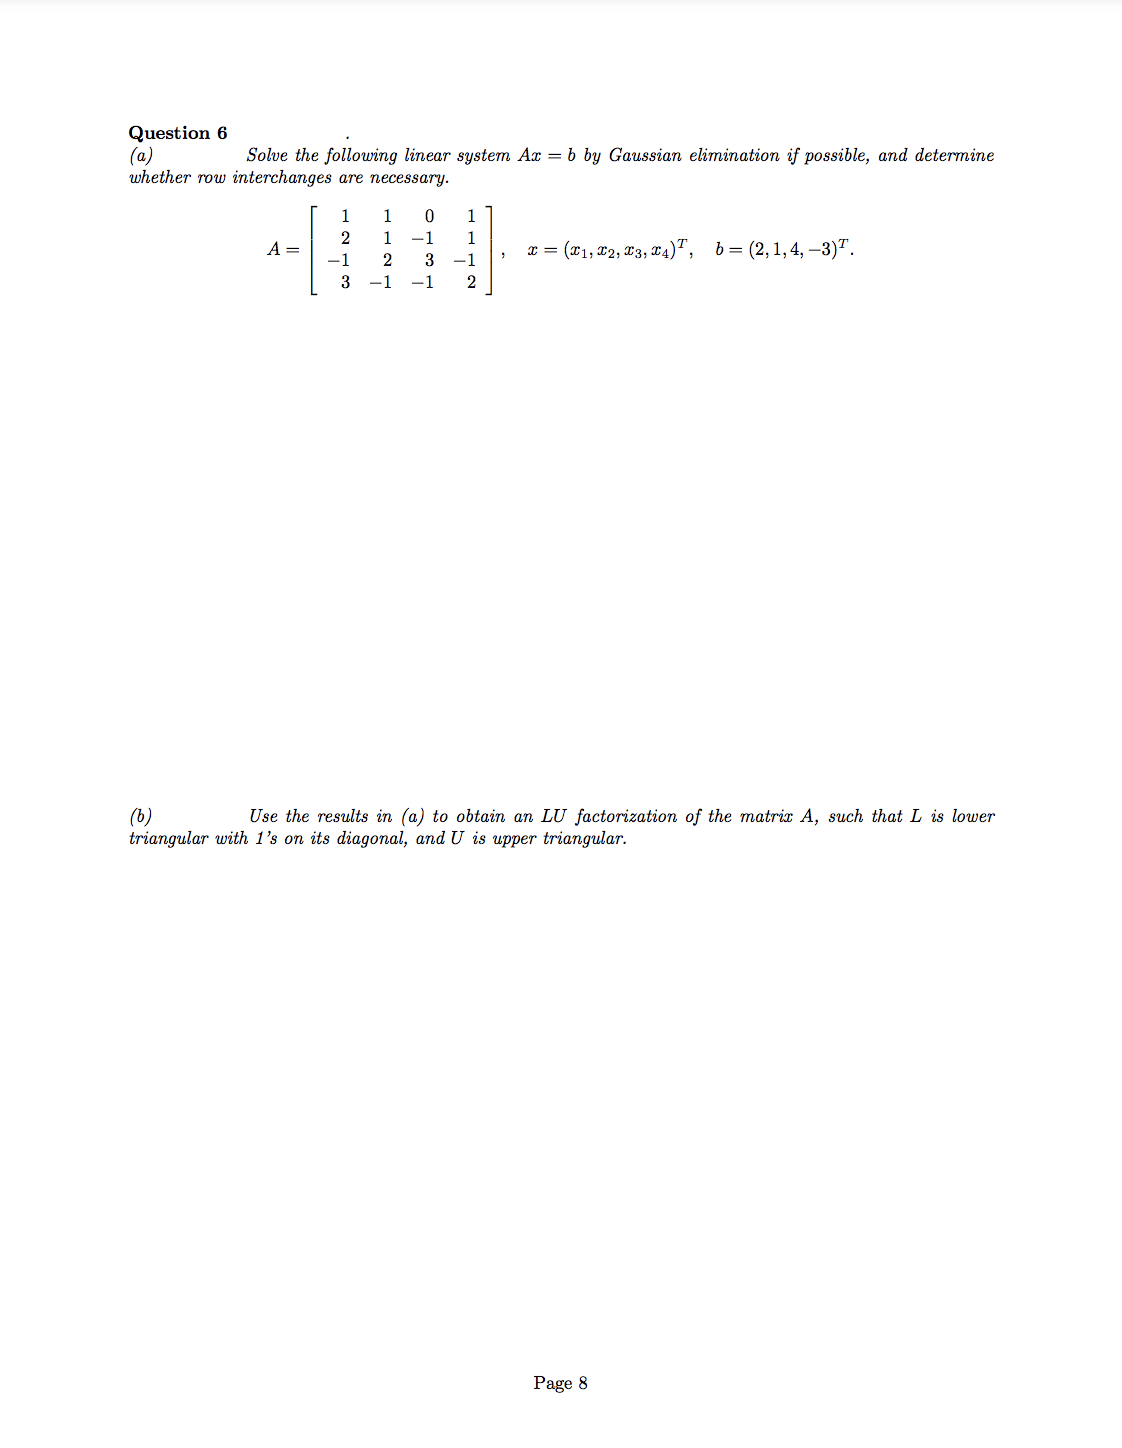 Question 6
(a)
whether row interchanges are necessary.
Solve the following linear system Ax = b by Gaussian elimination if possible, and determine
1
1
1
2
1
-1
1
A =
x = (x1, x2, x3, x4)", b= (2,1,4, –3)".
-1
2
3
-1
-1
-1
(b)
triangular with 1's on its diagonal, and U is upper triangular.
Use the results in (a) to obtain an LU factorization of the matrix A, such that L is lower
Page 8
